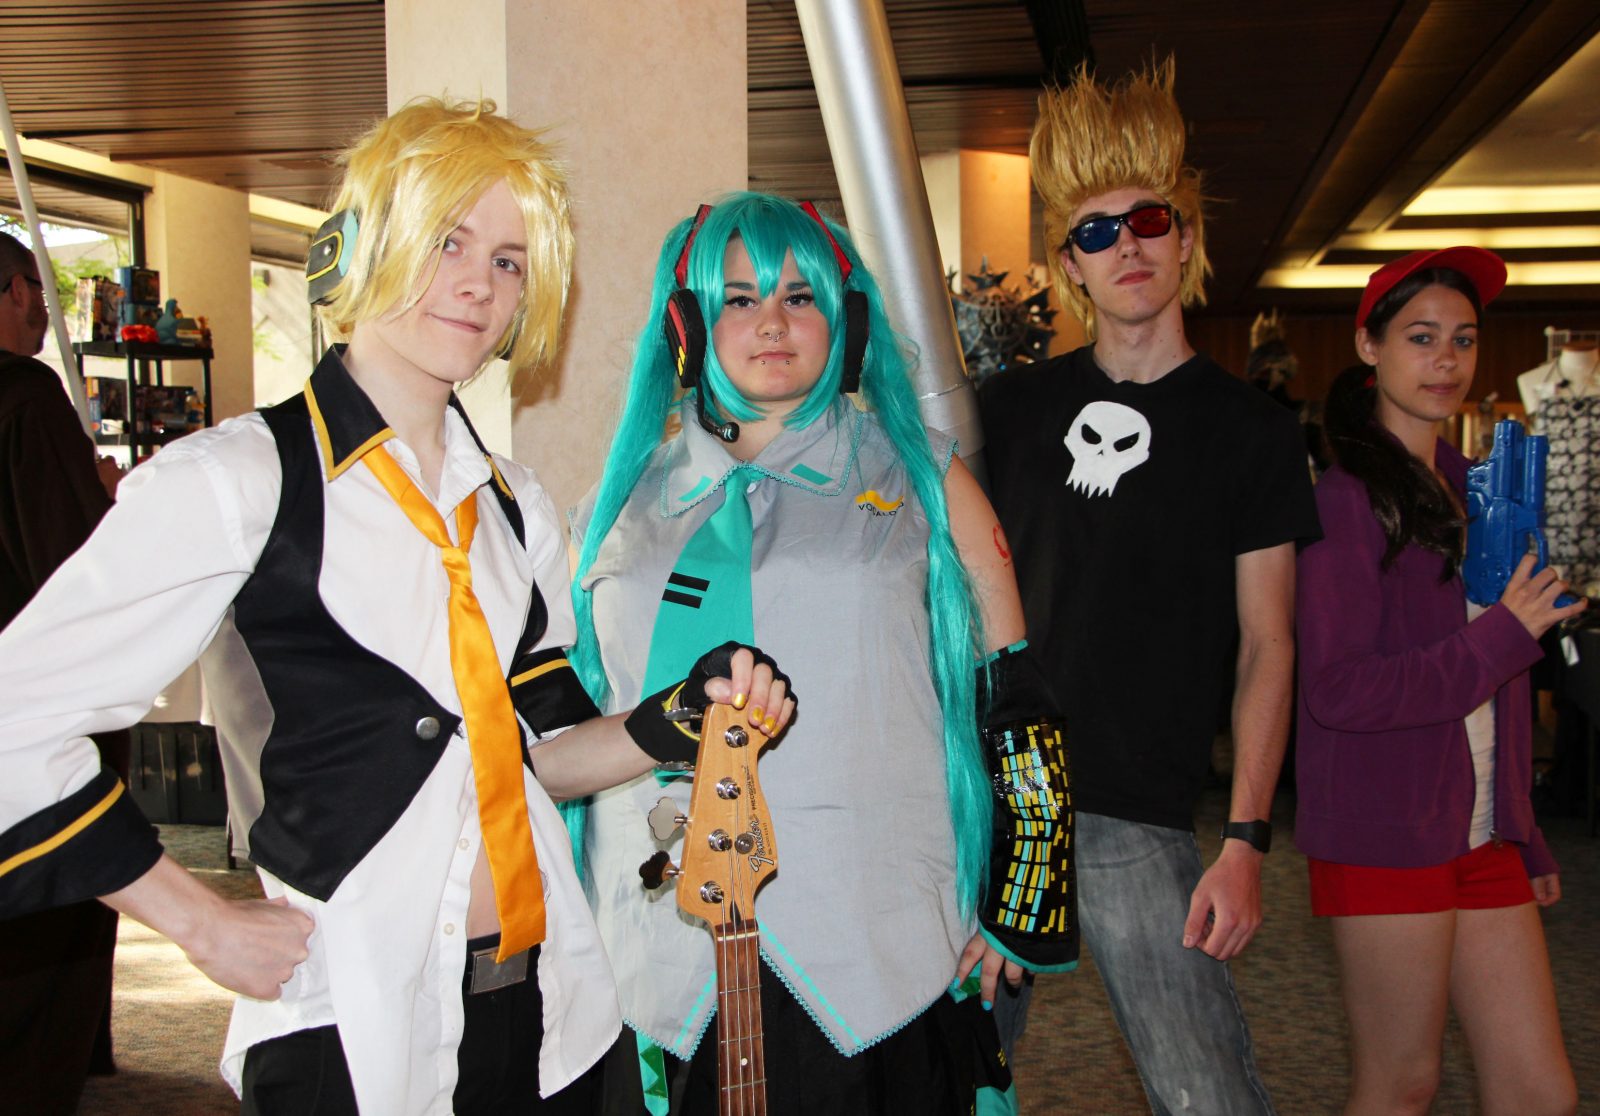 New bylaw may force closure of teen cosplay convention